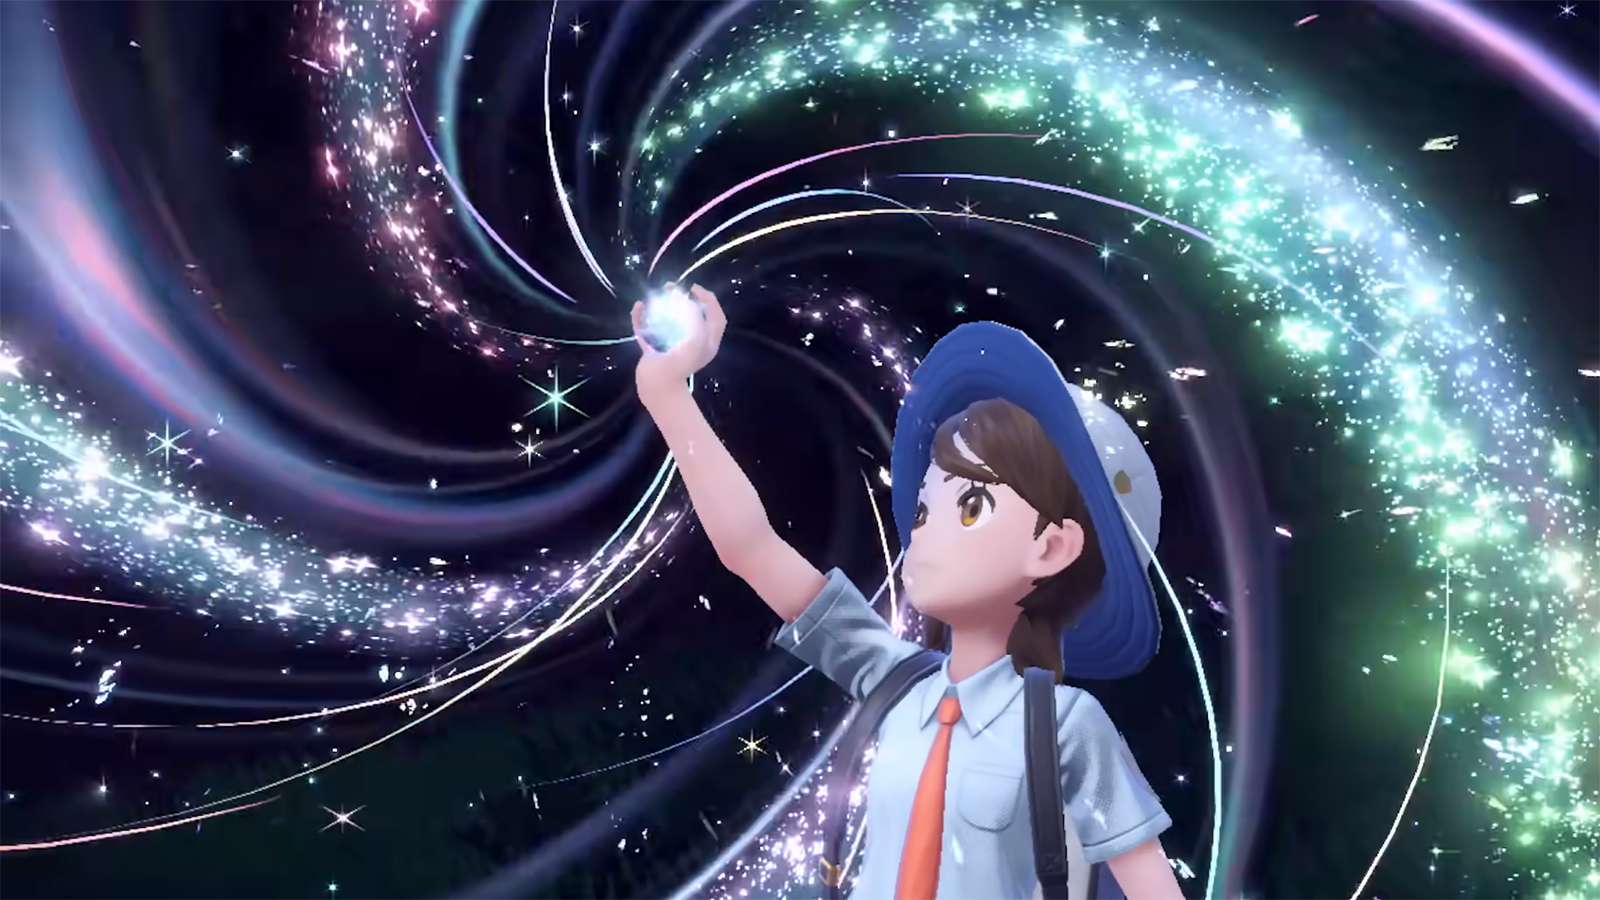 A Pokemon trainer holding a Pokeball in Scarlet & Violet